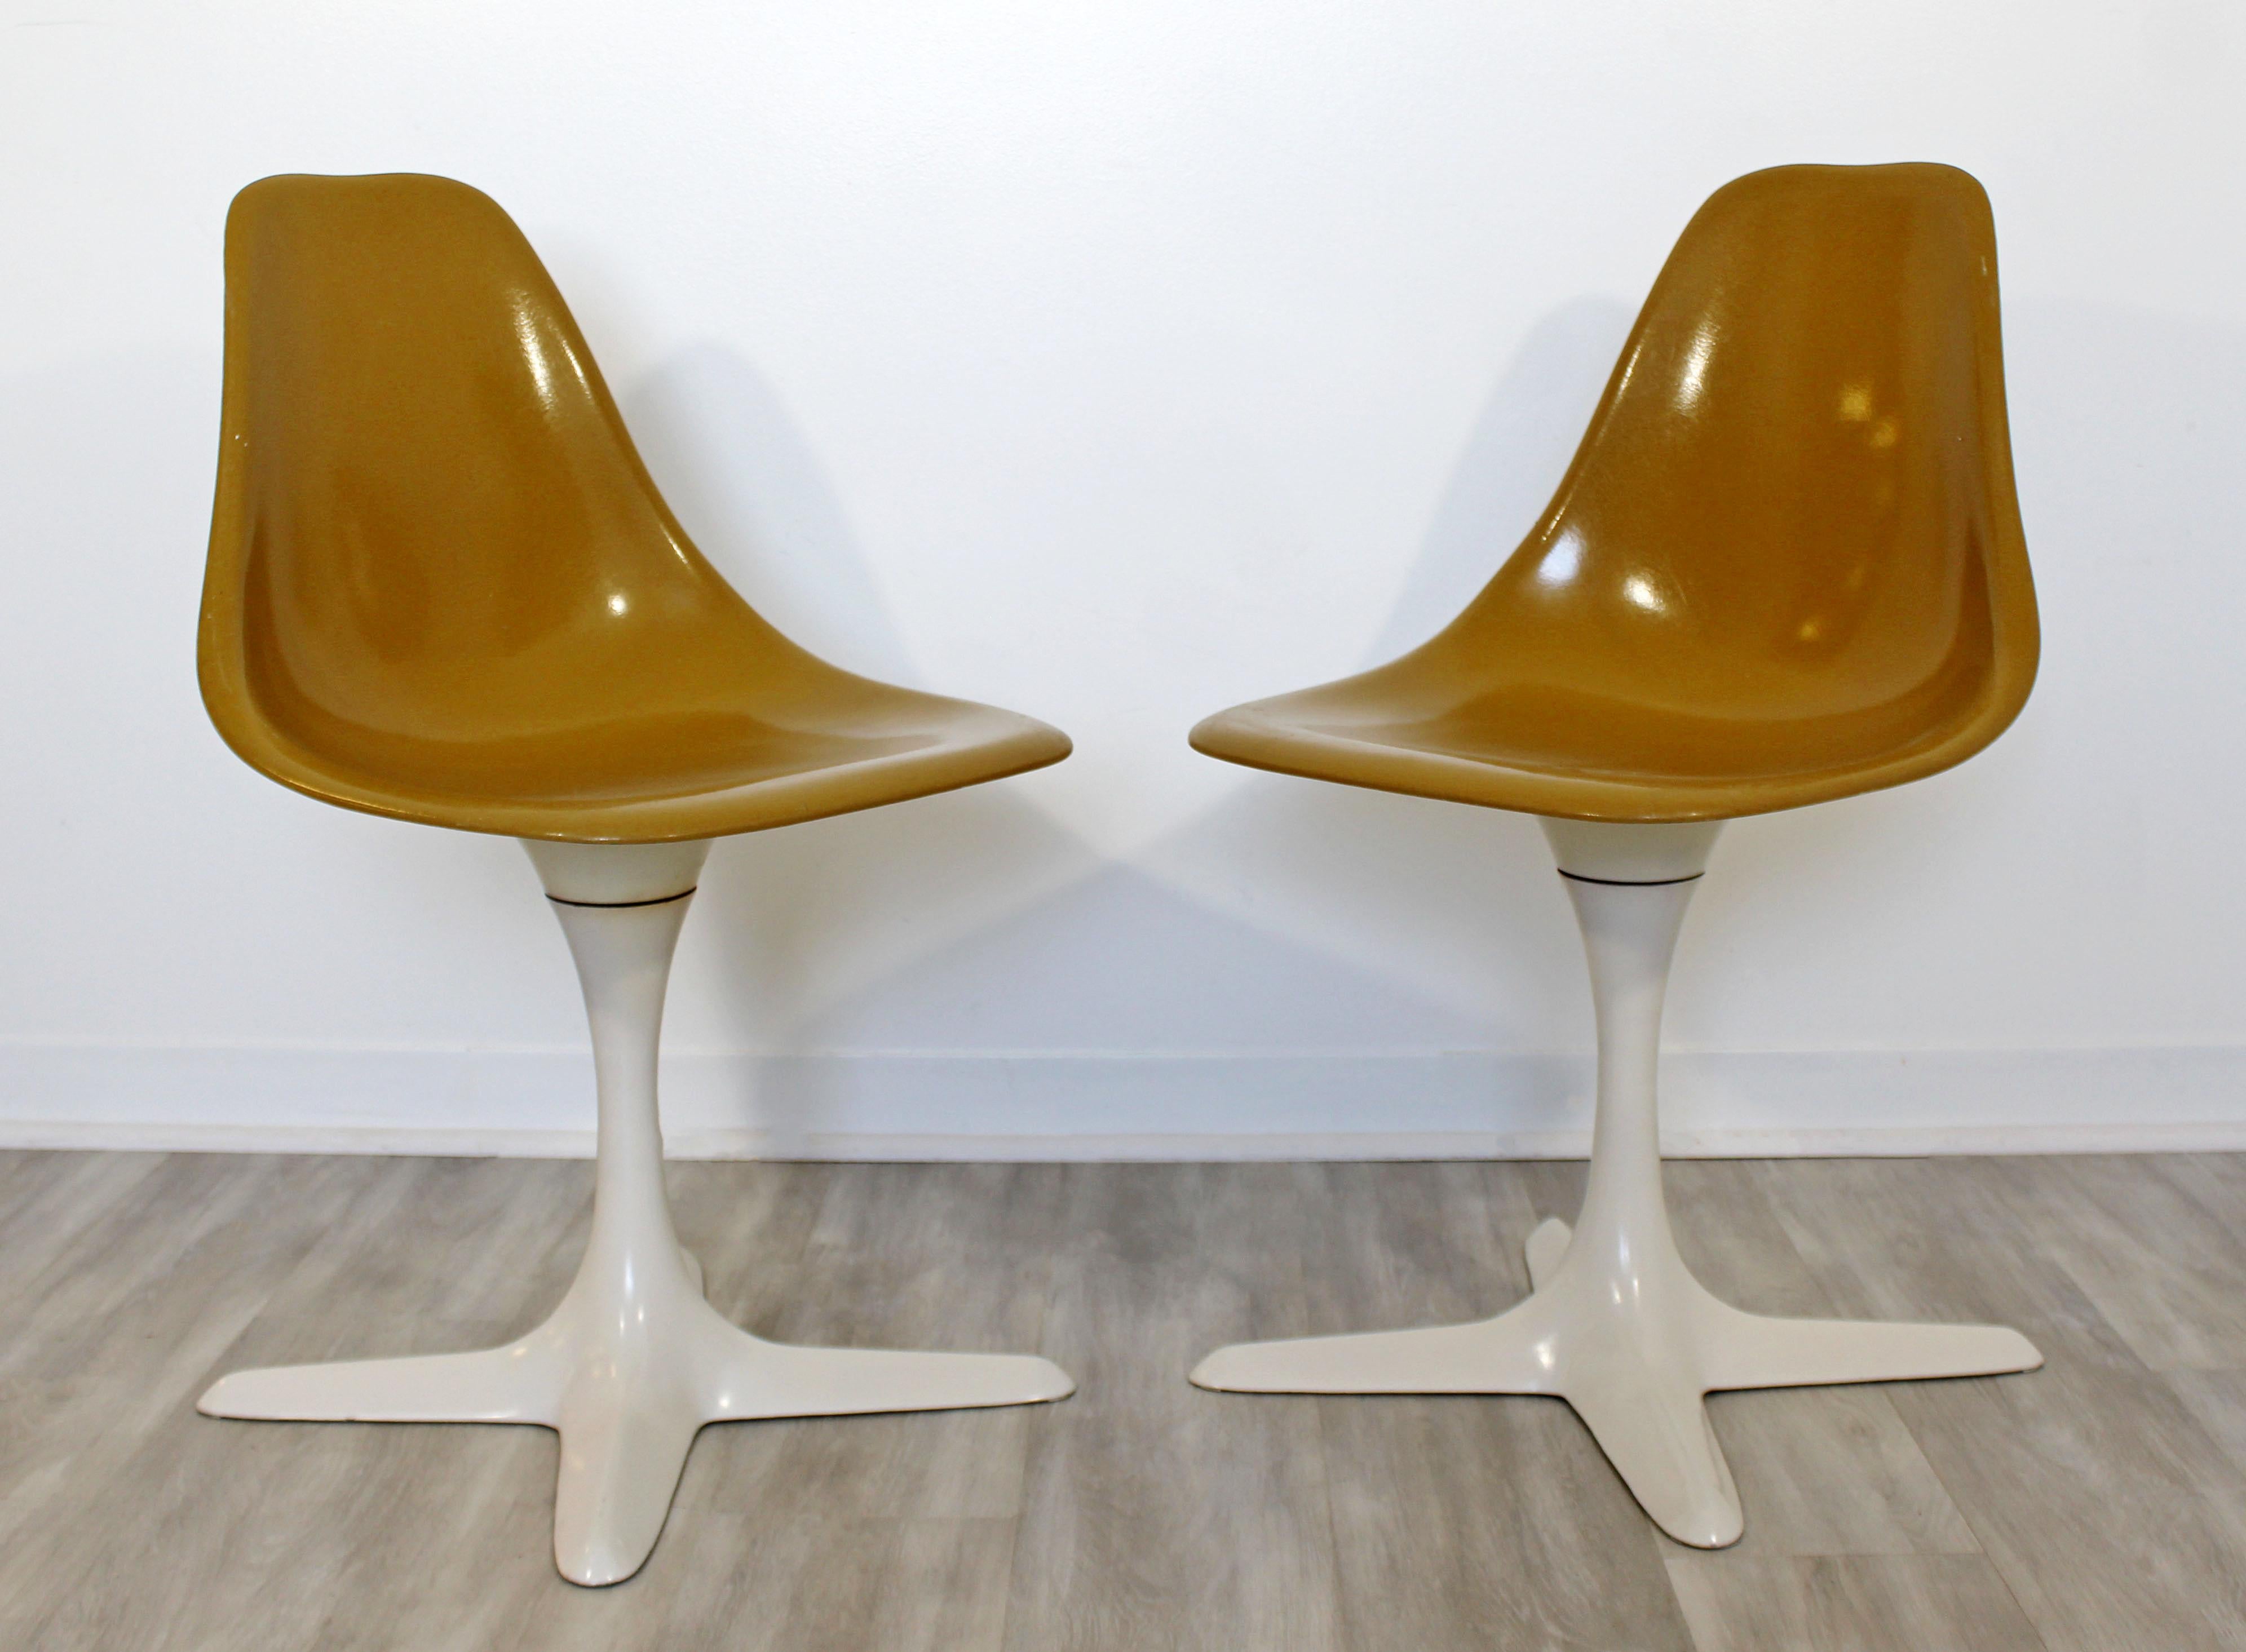 American Mid-Century Modern Burke Set of 4 Tulip Propeller Side Dining Chairs, 1960s